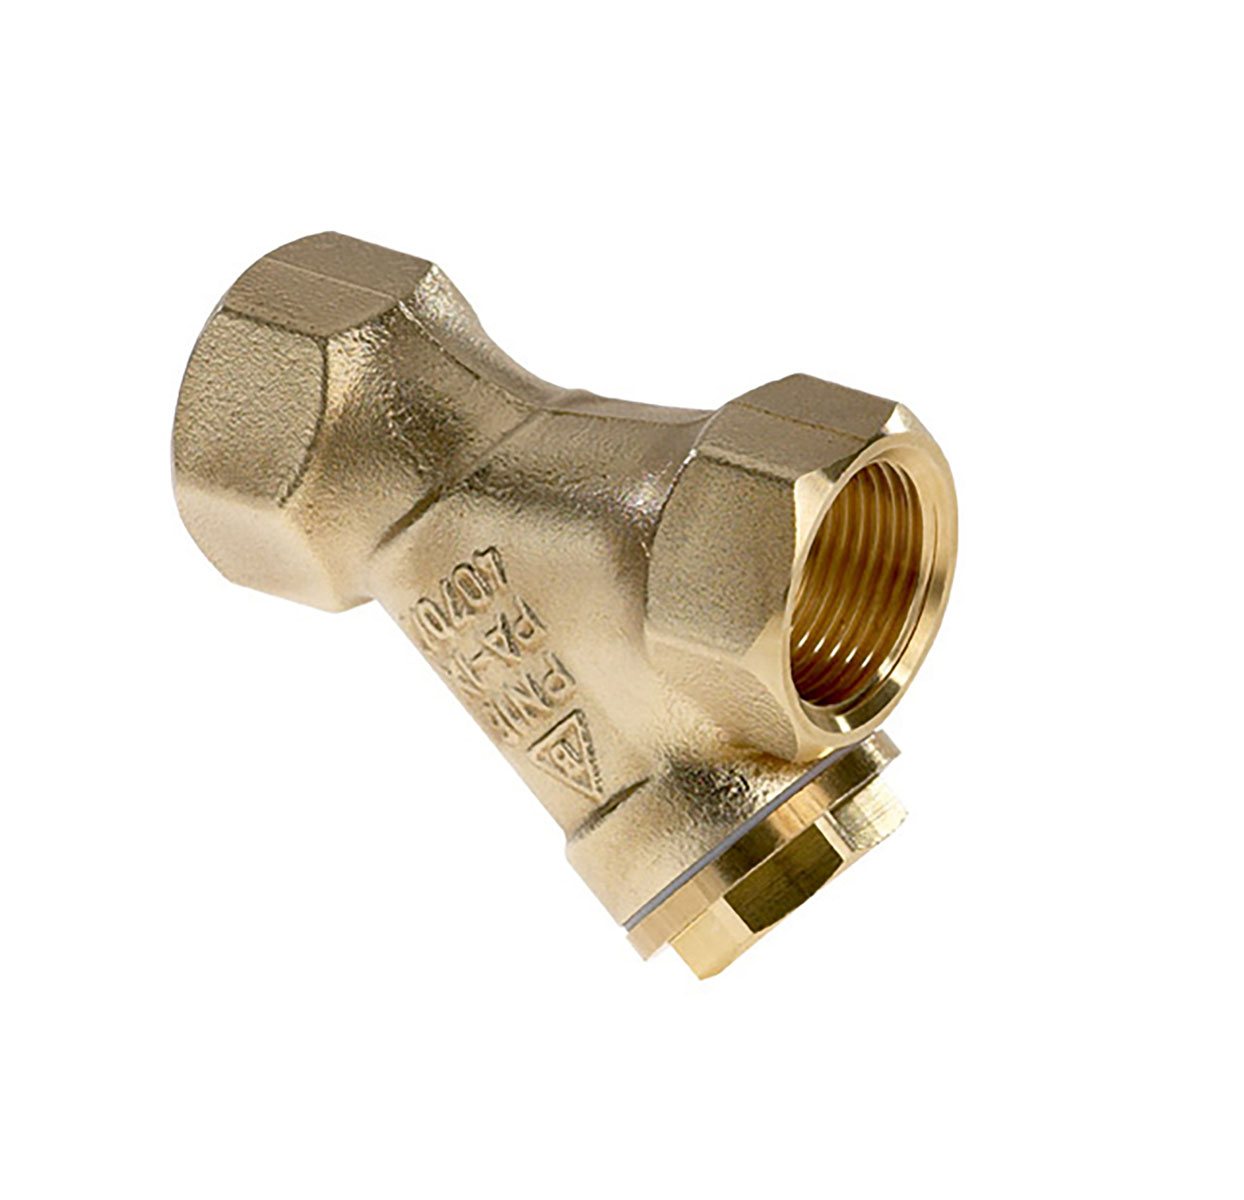 1450800 - CR-Brass Strainer Strainer with PTFE-sealing (Teflon)